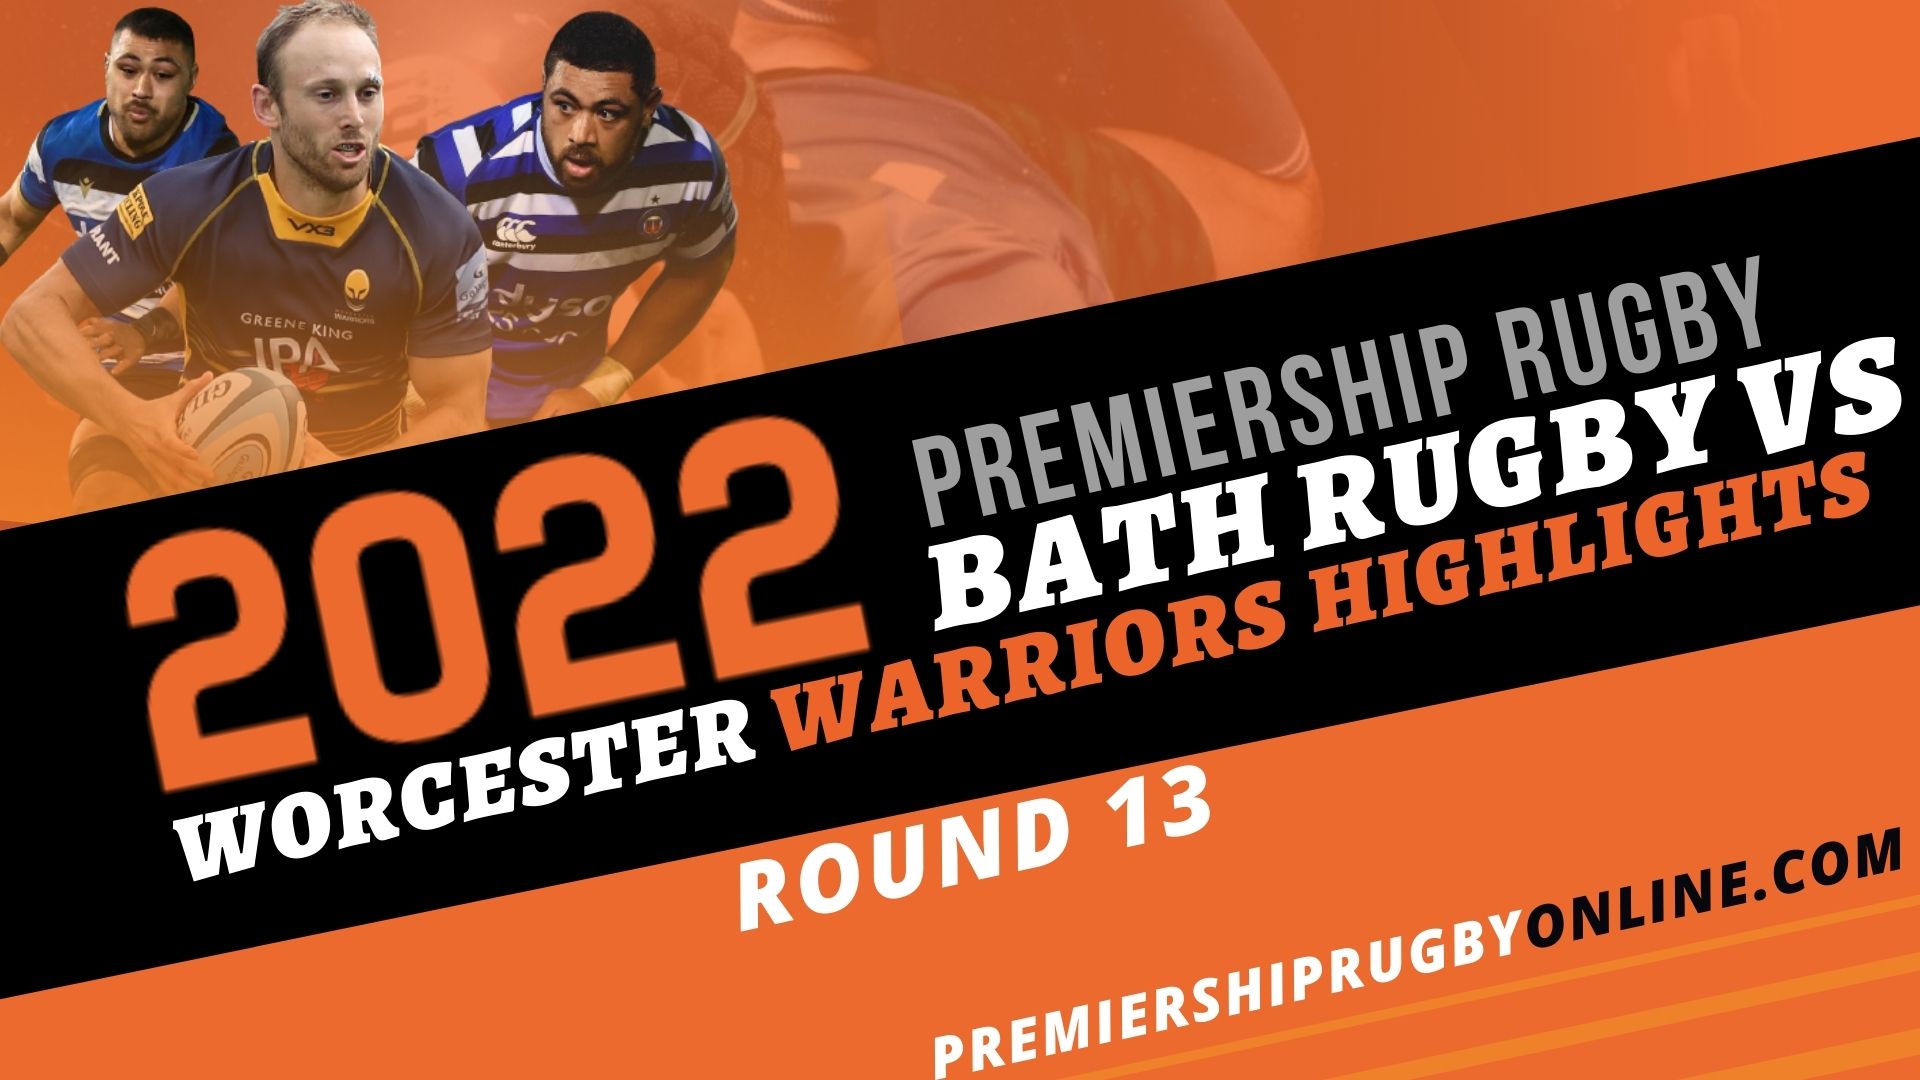 Bath Rugby Vs Worcester Warriors Highlights 2022 RD 13